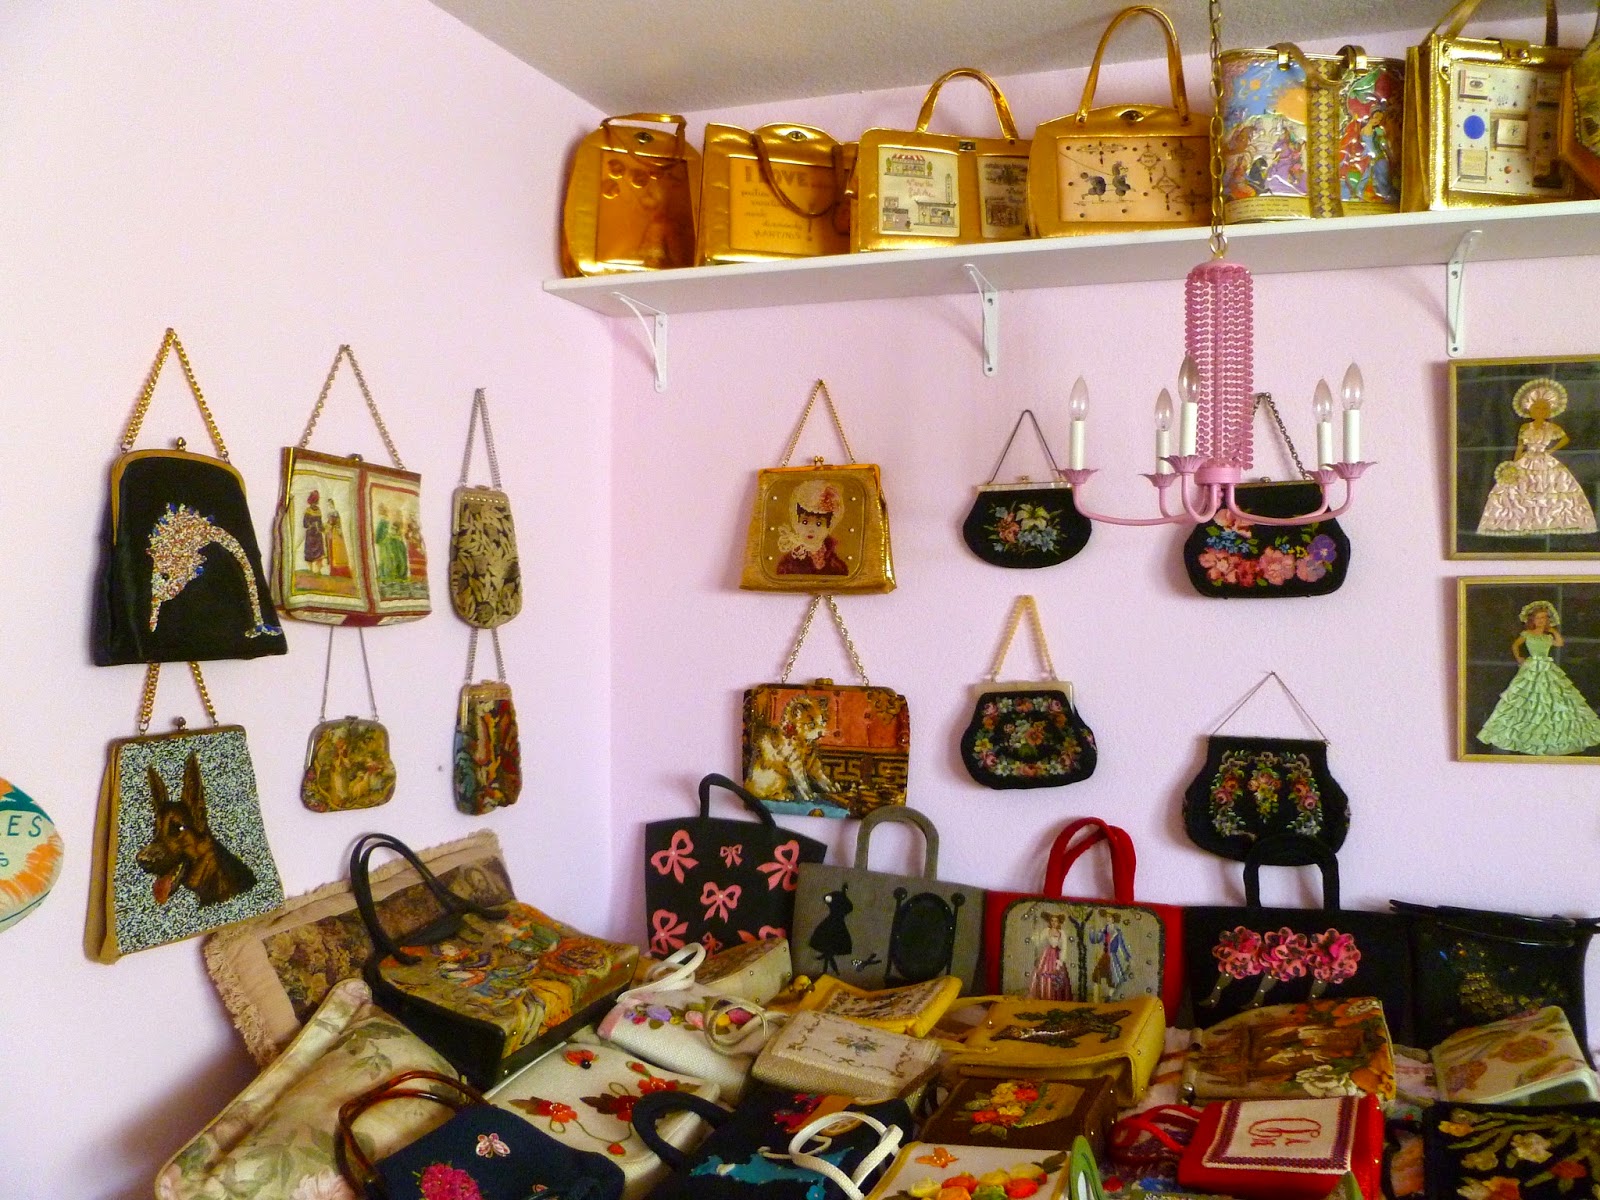 SPECIAL POST: The Vintage Purse Gallery Gets a New Look